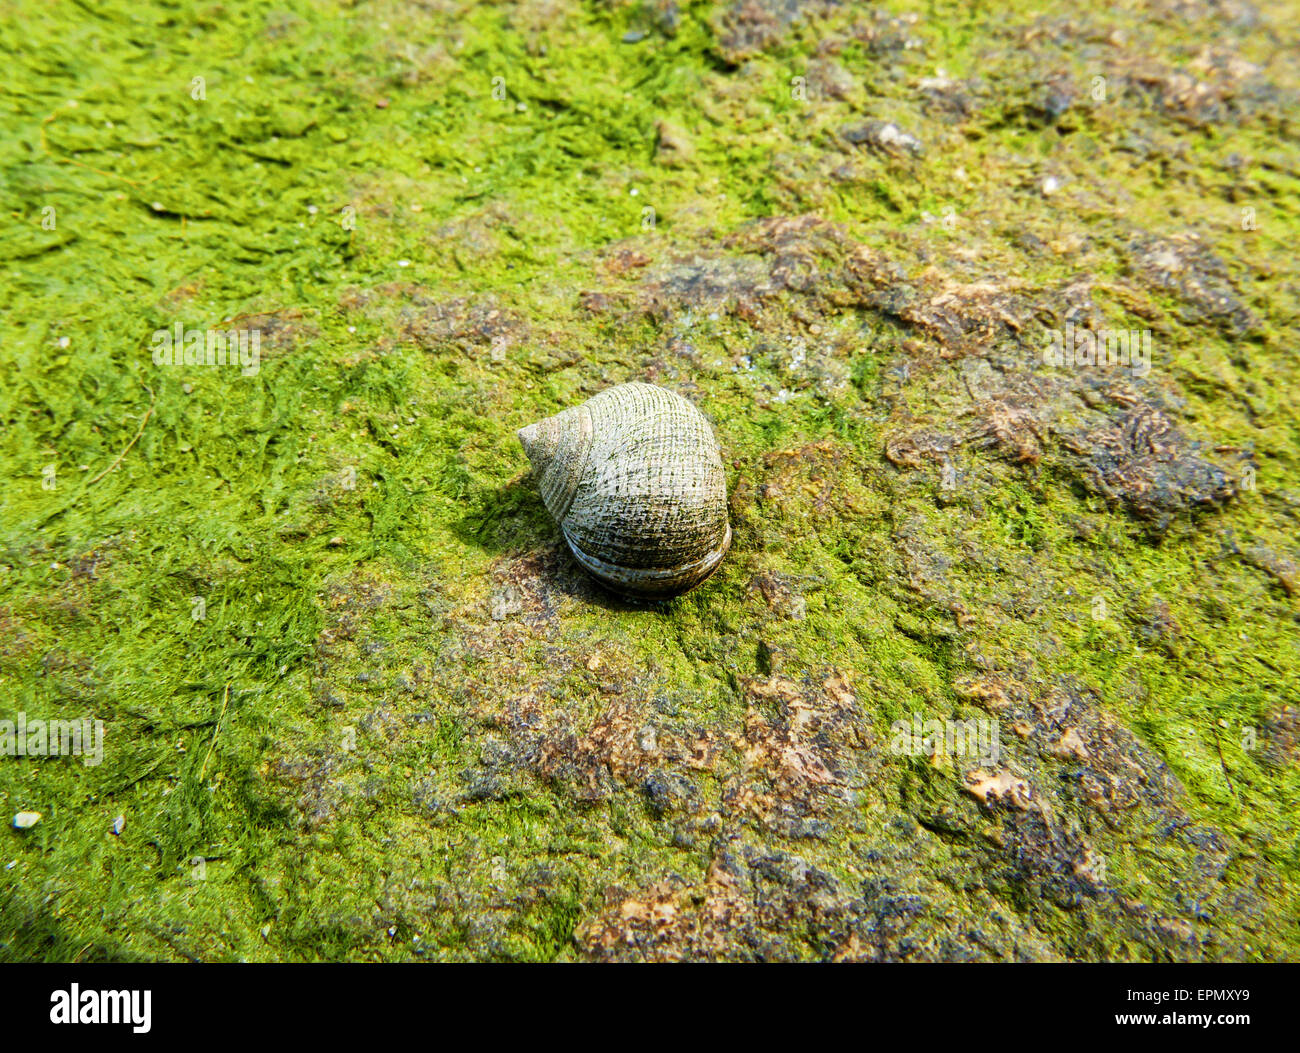 A single common periwinkle snail on a green algae covered rock. Stock Photo